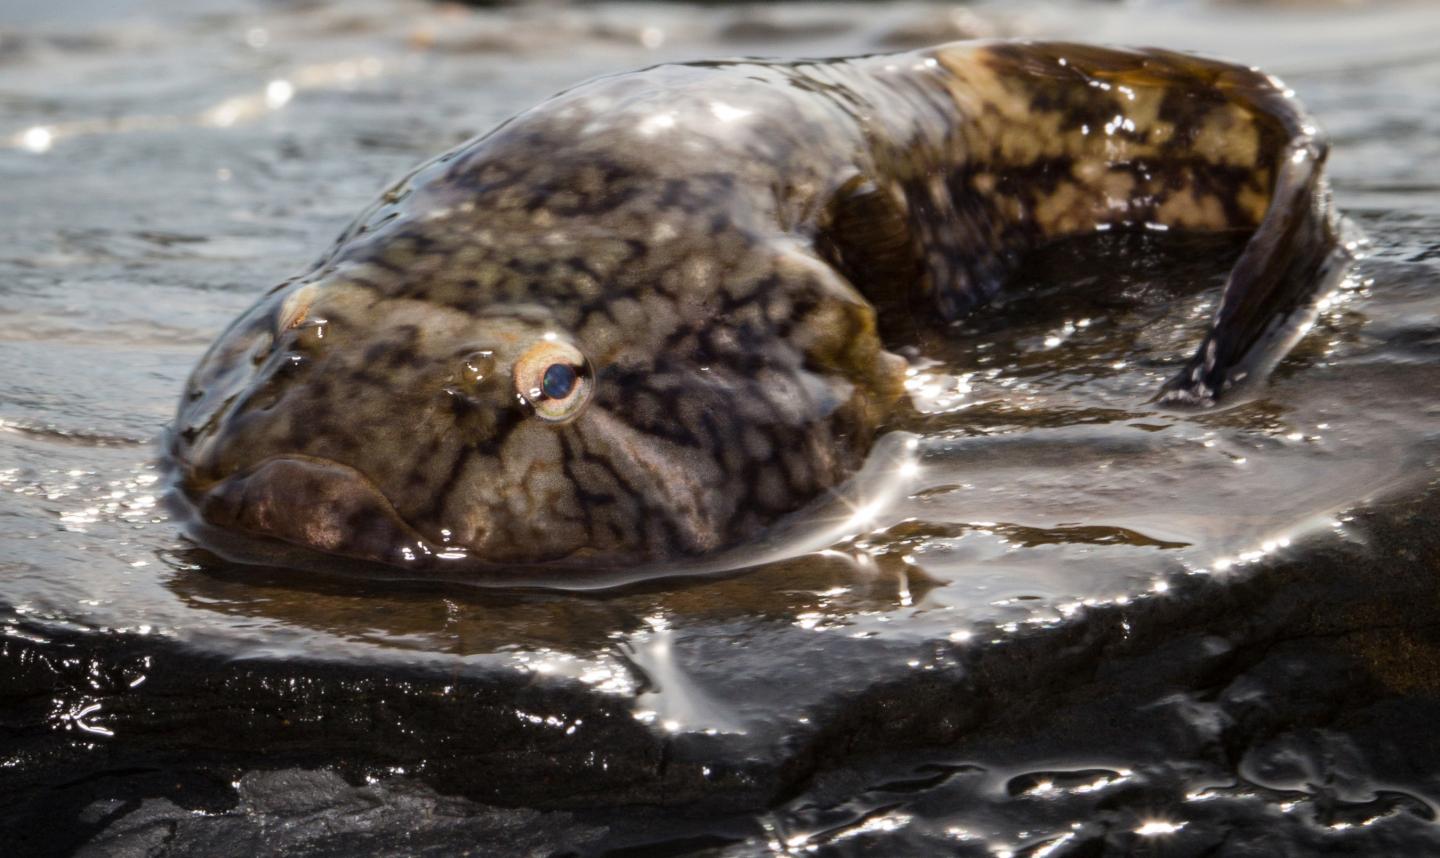 Clingfish-Inspired Tech Could Lead To A Less Slippery Future